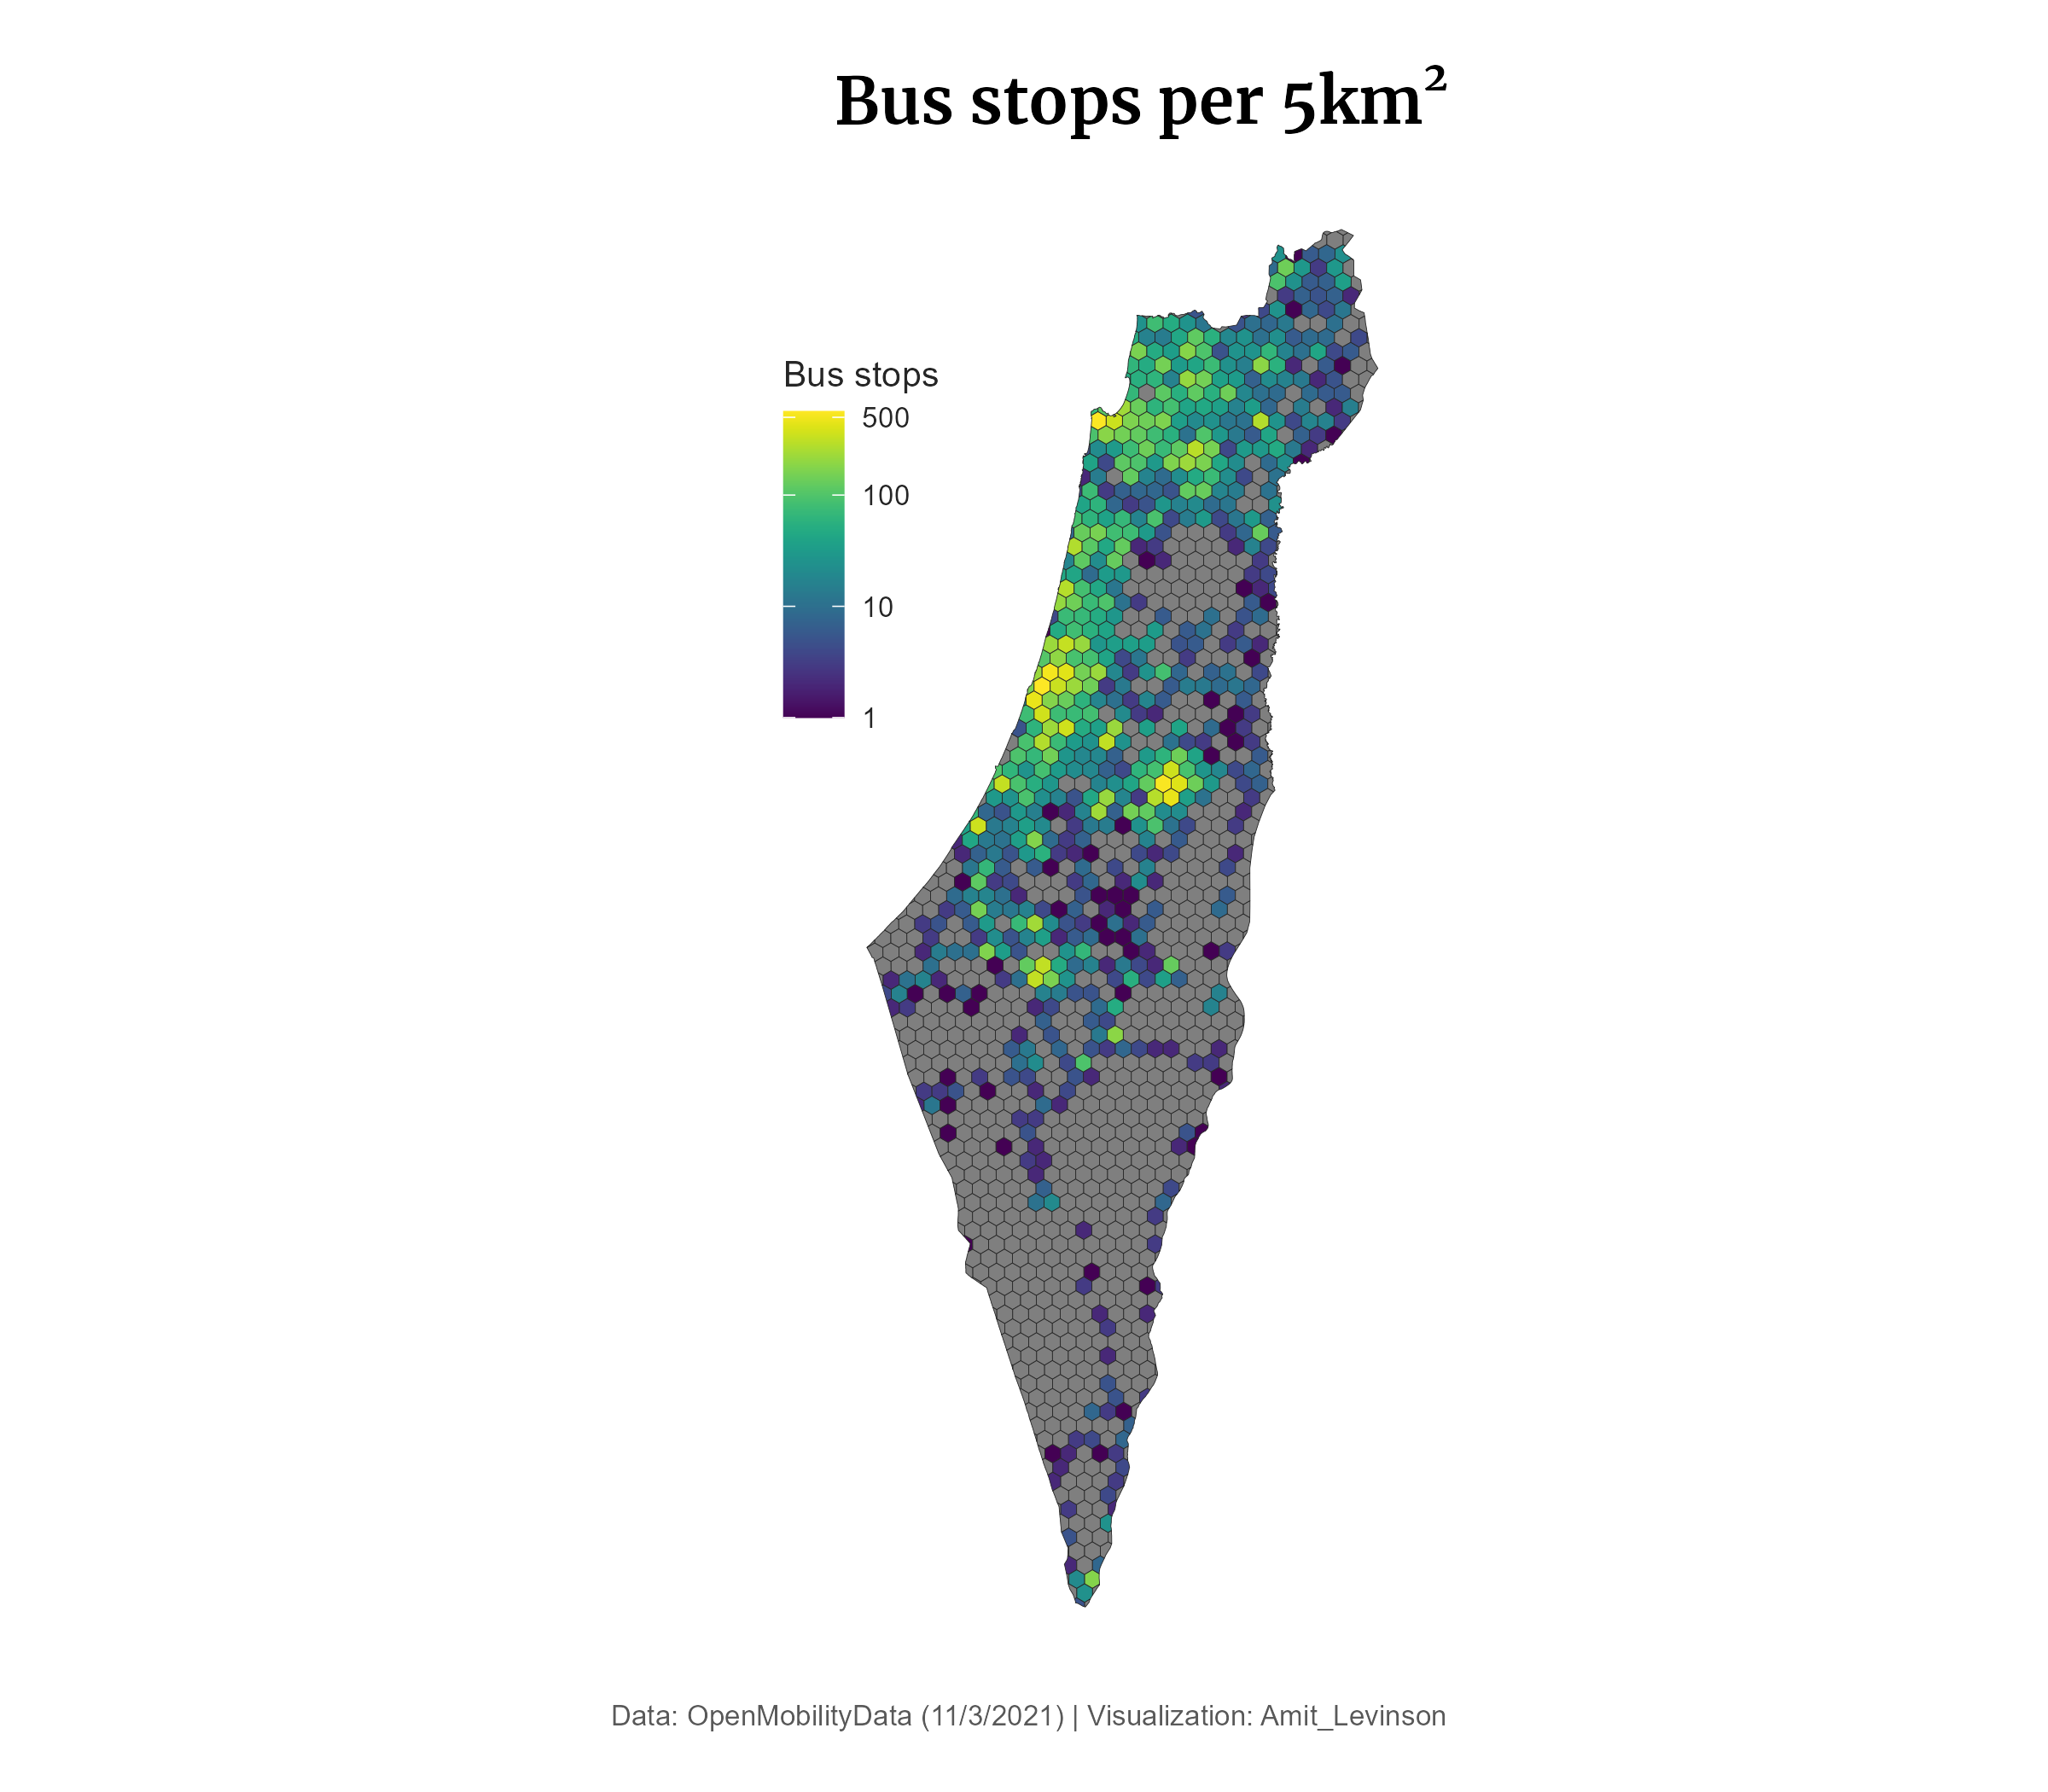 Map of Israel split to to 5km^2 hexagons and the number of bus stops in each hexagon